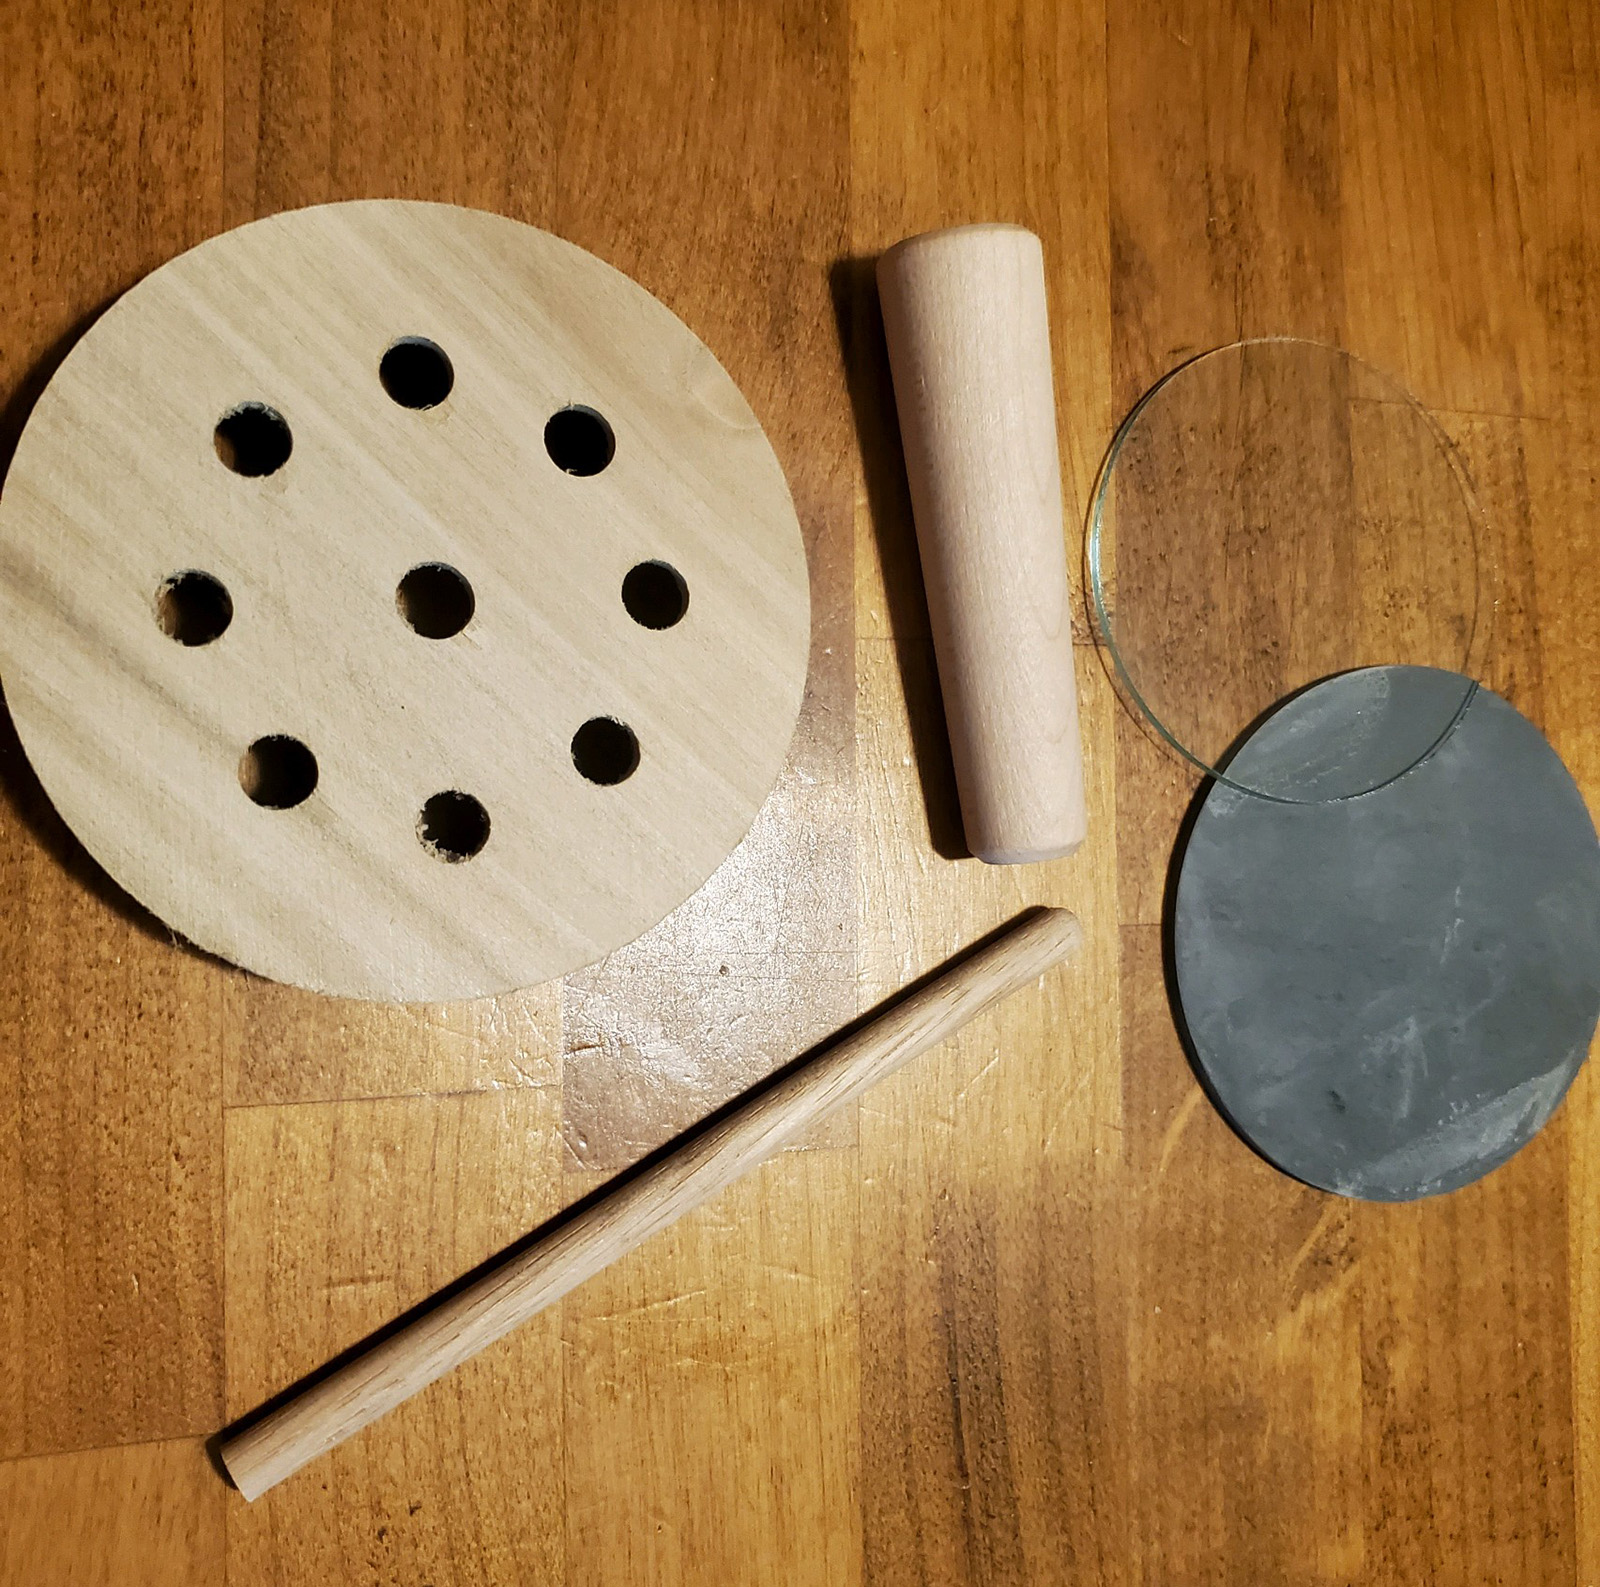 A photo of the parts involved in assembling a turkey call.